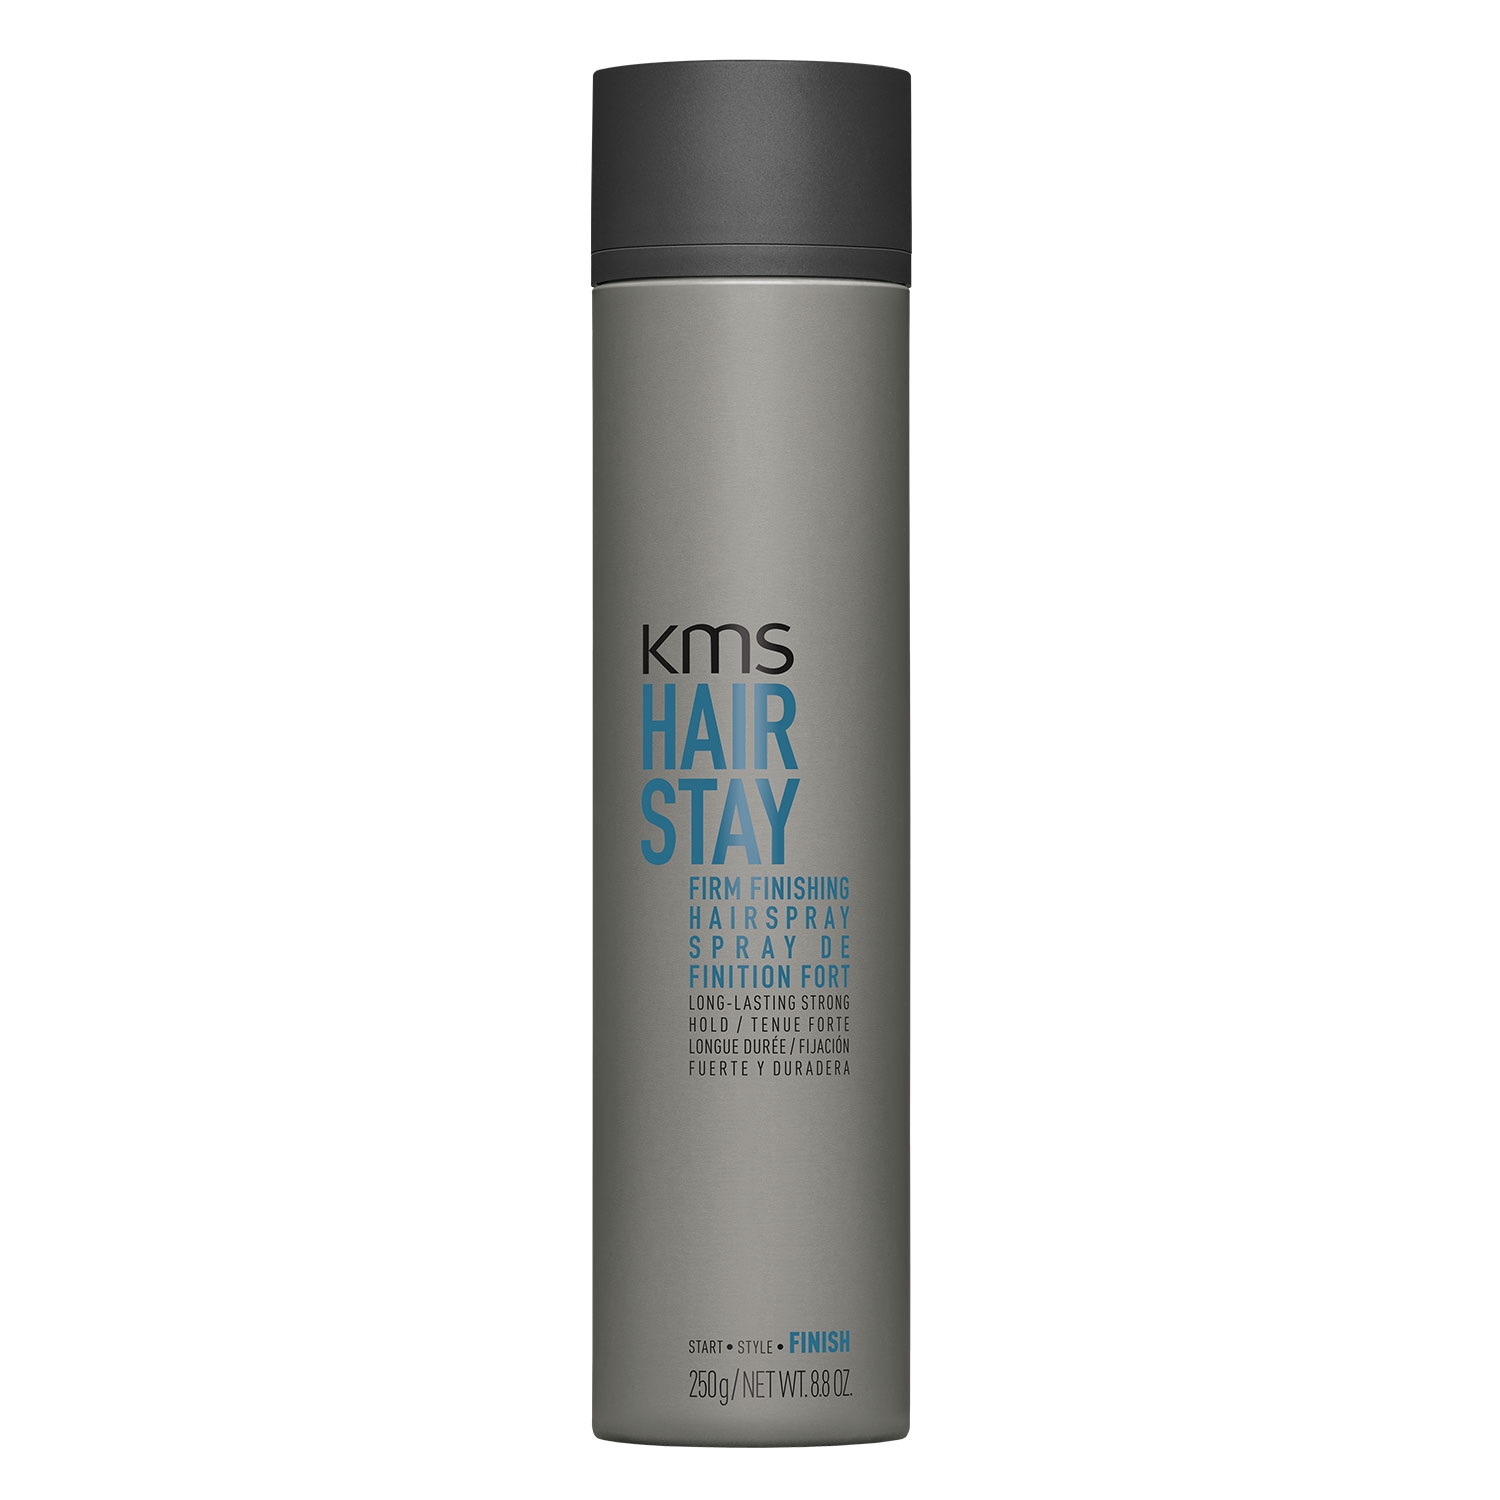 Product image from Hairstay - Firm Finishing Hairspray